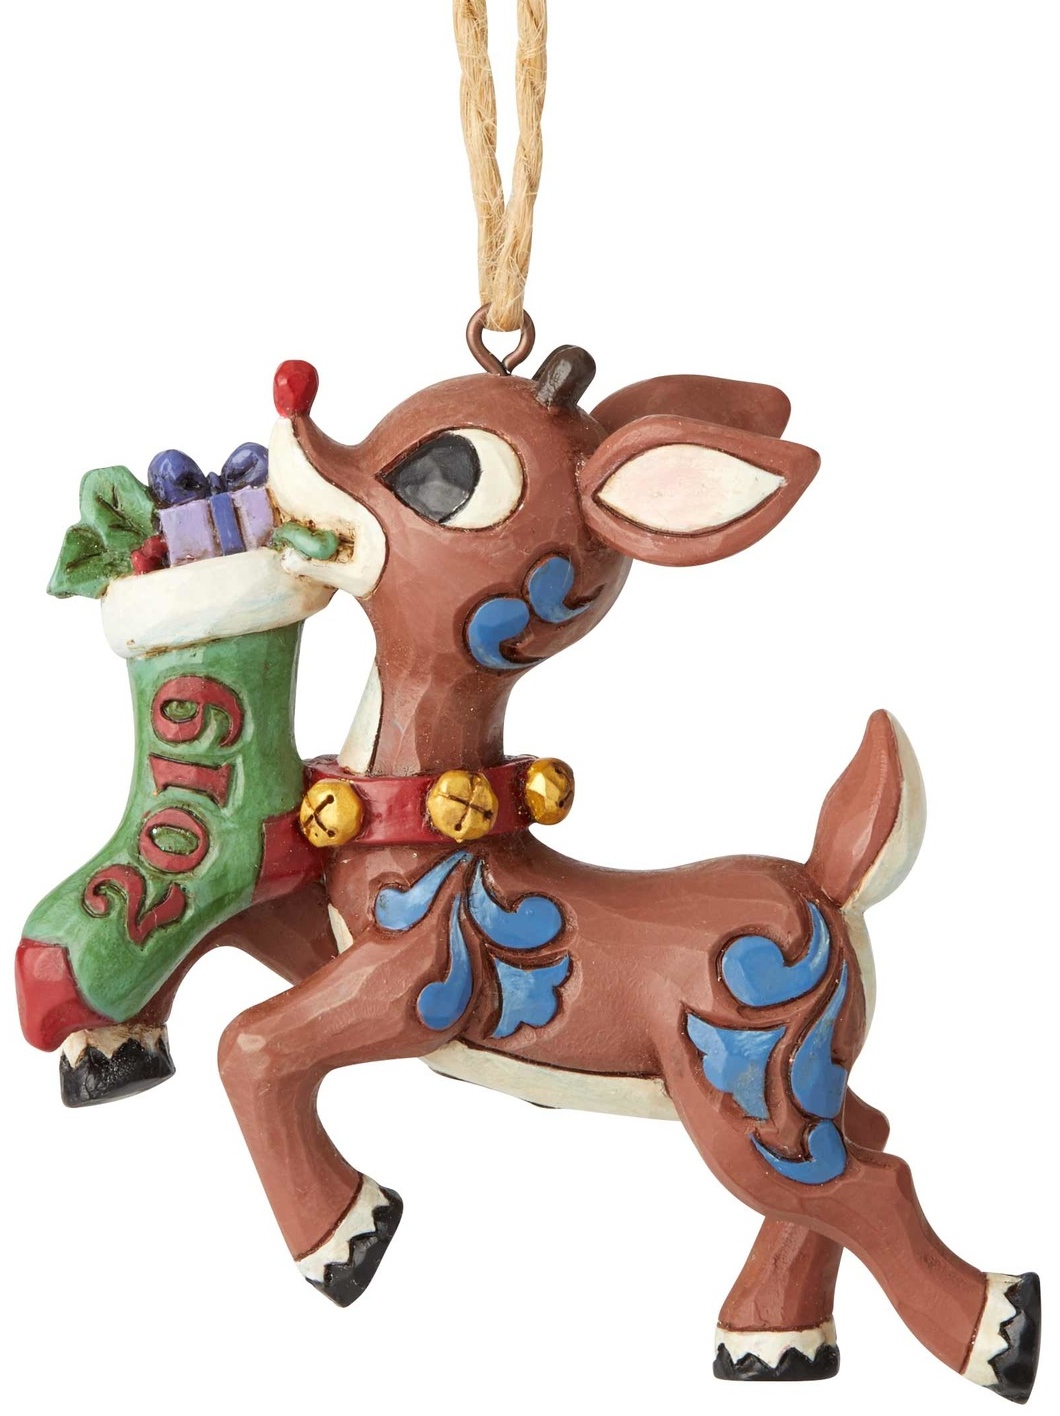 Rudolph Traditions by Jim Shore 6004148 Rudolph Holding Stocking